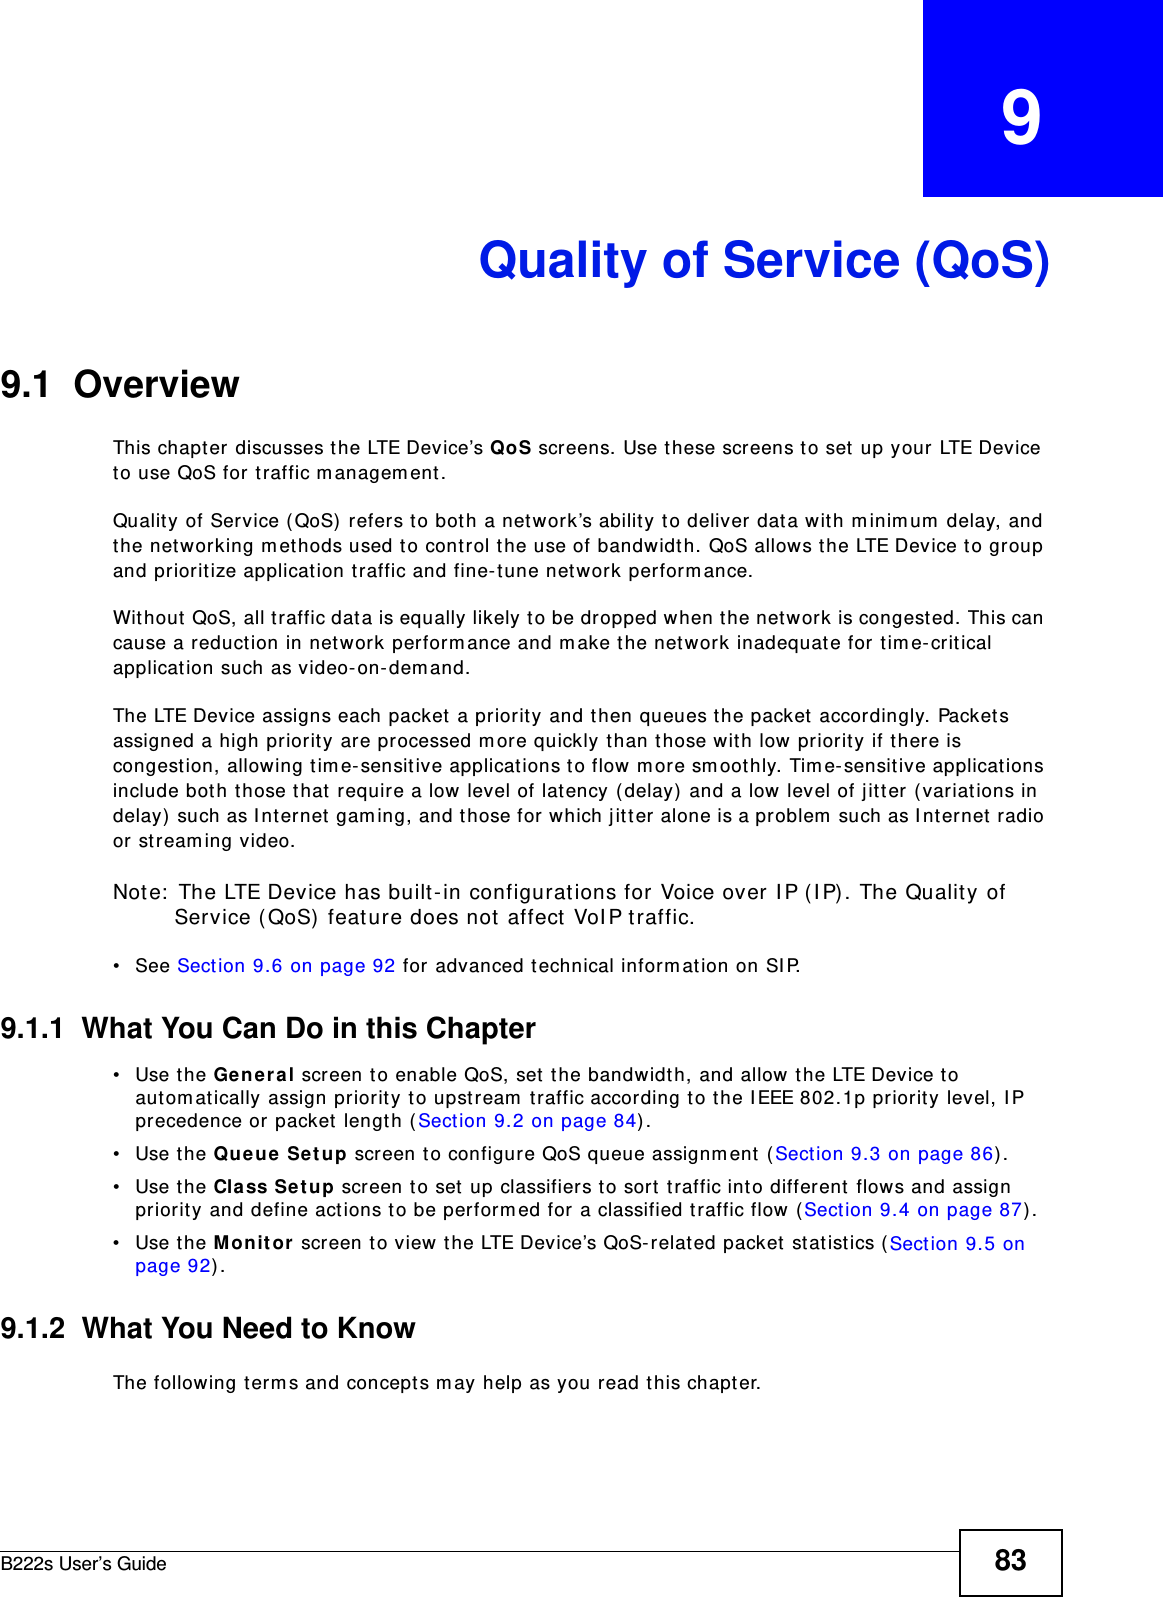 B222s User’s Guide 83CHAPTER   9Quality of Service (QoS)9.1  OverviewThis chapt er  discusses t he LTE Device’s QoS screens. Use t hese screens to set  up your LTE Device to use QoS for traffic m anagem ent . Quality of Service ( QoS)  refers to bot h a network’s ability t o deliver data with m inim um  delay, and the net working m ethods used t o cont rol t he use of bandwidth. QoS allows the LTE Device t o group and prioritize applicat ion traffic and fine- t une network perform ance. Wit hout QoS, all t raffic dat a is equally likely t o be dropped when t he net work is congested. This can cause a reduct ion in network perform ance and m ake t he net work inadequate for t im e- critical application such as video-on- dem and.The LTE Device assigns each packet  a pr iorit y and t hen queues t he packet  accordingly. Packet s assigned a high priorit y are pr ocessed m ore quickly than t hose with low priorit y if t here is congestion, allowing tim e- sensit ive applications to flow m ore sm oothly. Tim e- sensitive applicat ions include bot h t hose t hat  require a low level of lat ency (delay)  and a low  level of j itt er (variat ions in delay)  such as I nternet  gam ing, and t hose for which j itt er alone is a problem  such as I nt ernet radio or st ream ing video.Note:  The LTE Device has built -in configurations for Voice over I P ( I P) . The Quality of Service ( QoS) feature does not  affect VoI P t raffic. • See Section 9.6 on page 92 for advanced t echnical inform ation on SI P.9.1.1  What You Can Do in this Chapter• Use the Genera l screen to enable QoS, set the bandwidt h, and allow t he LTE Device t o autom atically assign priorit y t o upstream  traffic according to t he I EEE 802.1p pr iorit y level, I P precedence or packet length ( Section 9.2 on page 84) .• Use the Queue Se t up screen t o configure QoS queue assignm ent (Sect ion 9.3 on page 86) .• Use the Cla ss Set up screen t o set up classifiers t o sort  t raffic into different  flows and assign priorit y and define actions to be perform ed for a classified traffic flow (Sect ion 9.4 on page 87) .• Use the M on it o r screen t o view the LTE Device’s QoS- relat ed packet st atist ics ( Sect ion 9.5 on page 92) .9.1.2  What You Need to KnowThe following term s and concept s m ay help as you read this chapt er.